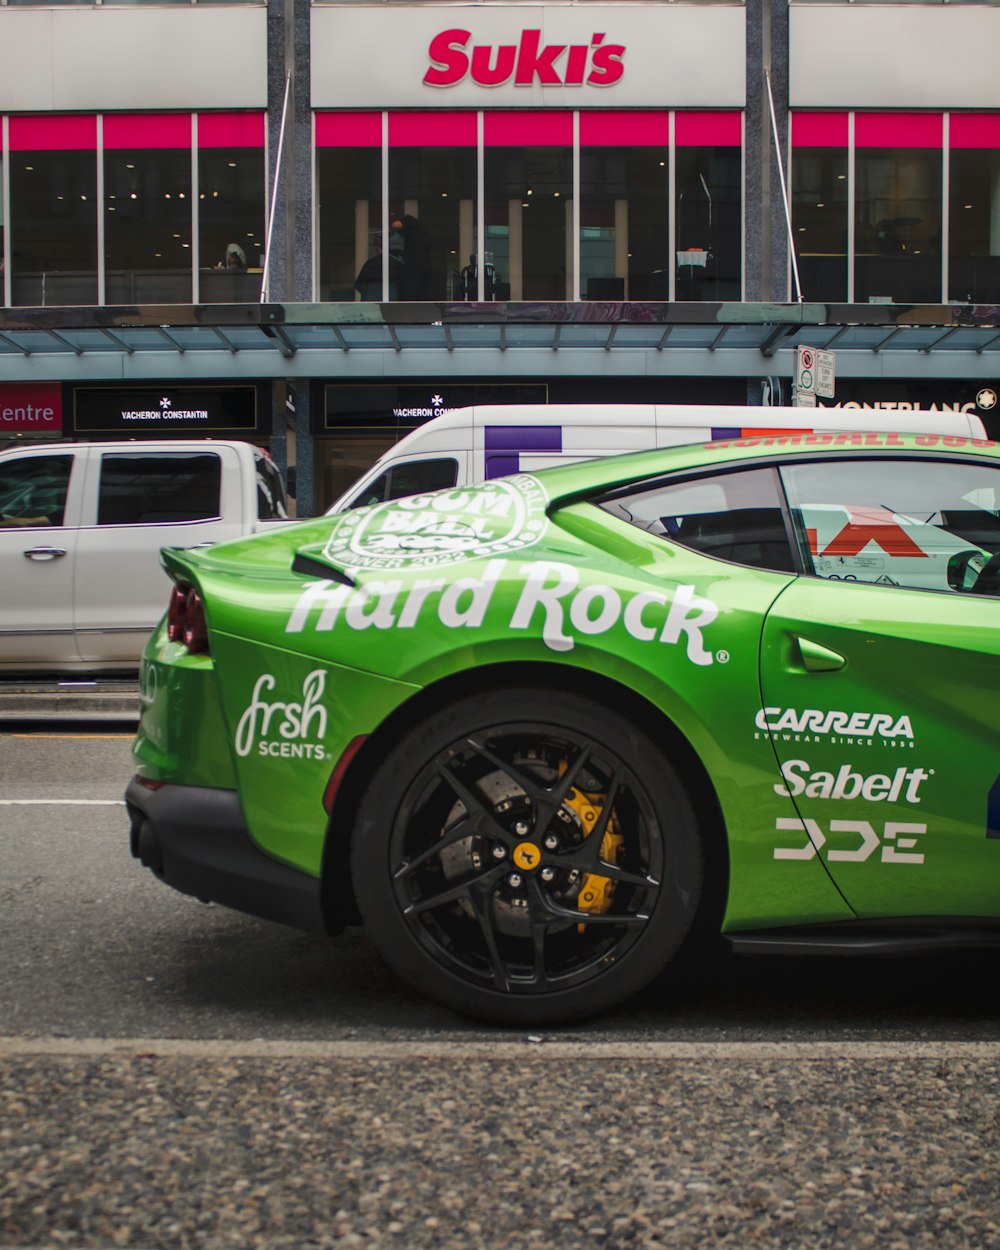 a green sports car parked in front of a store